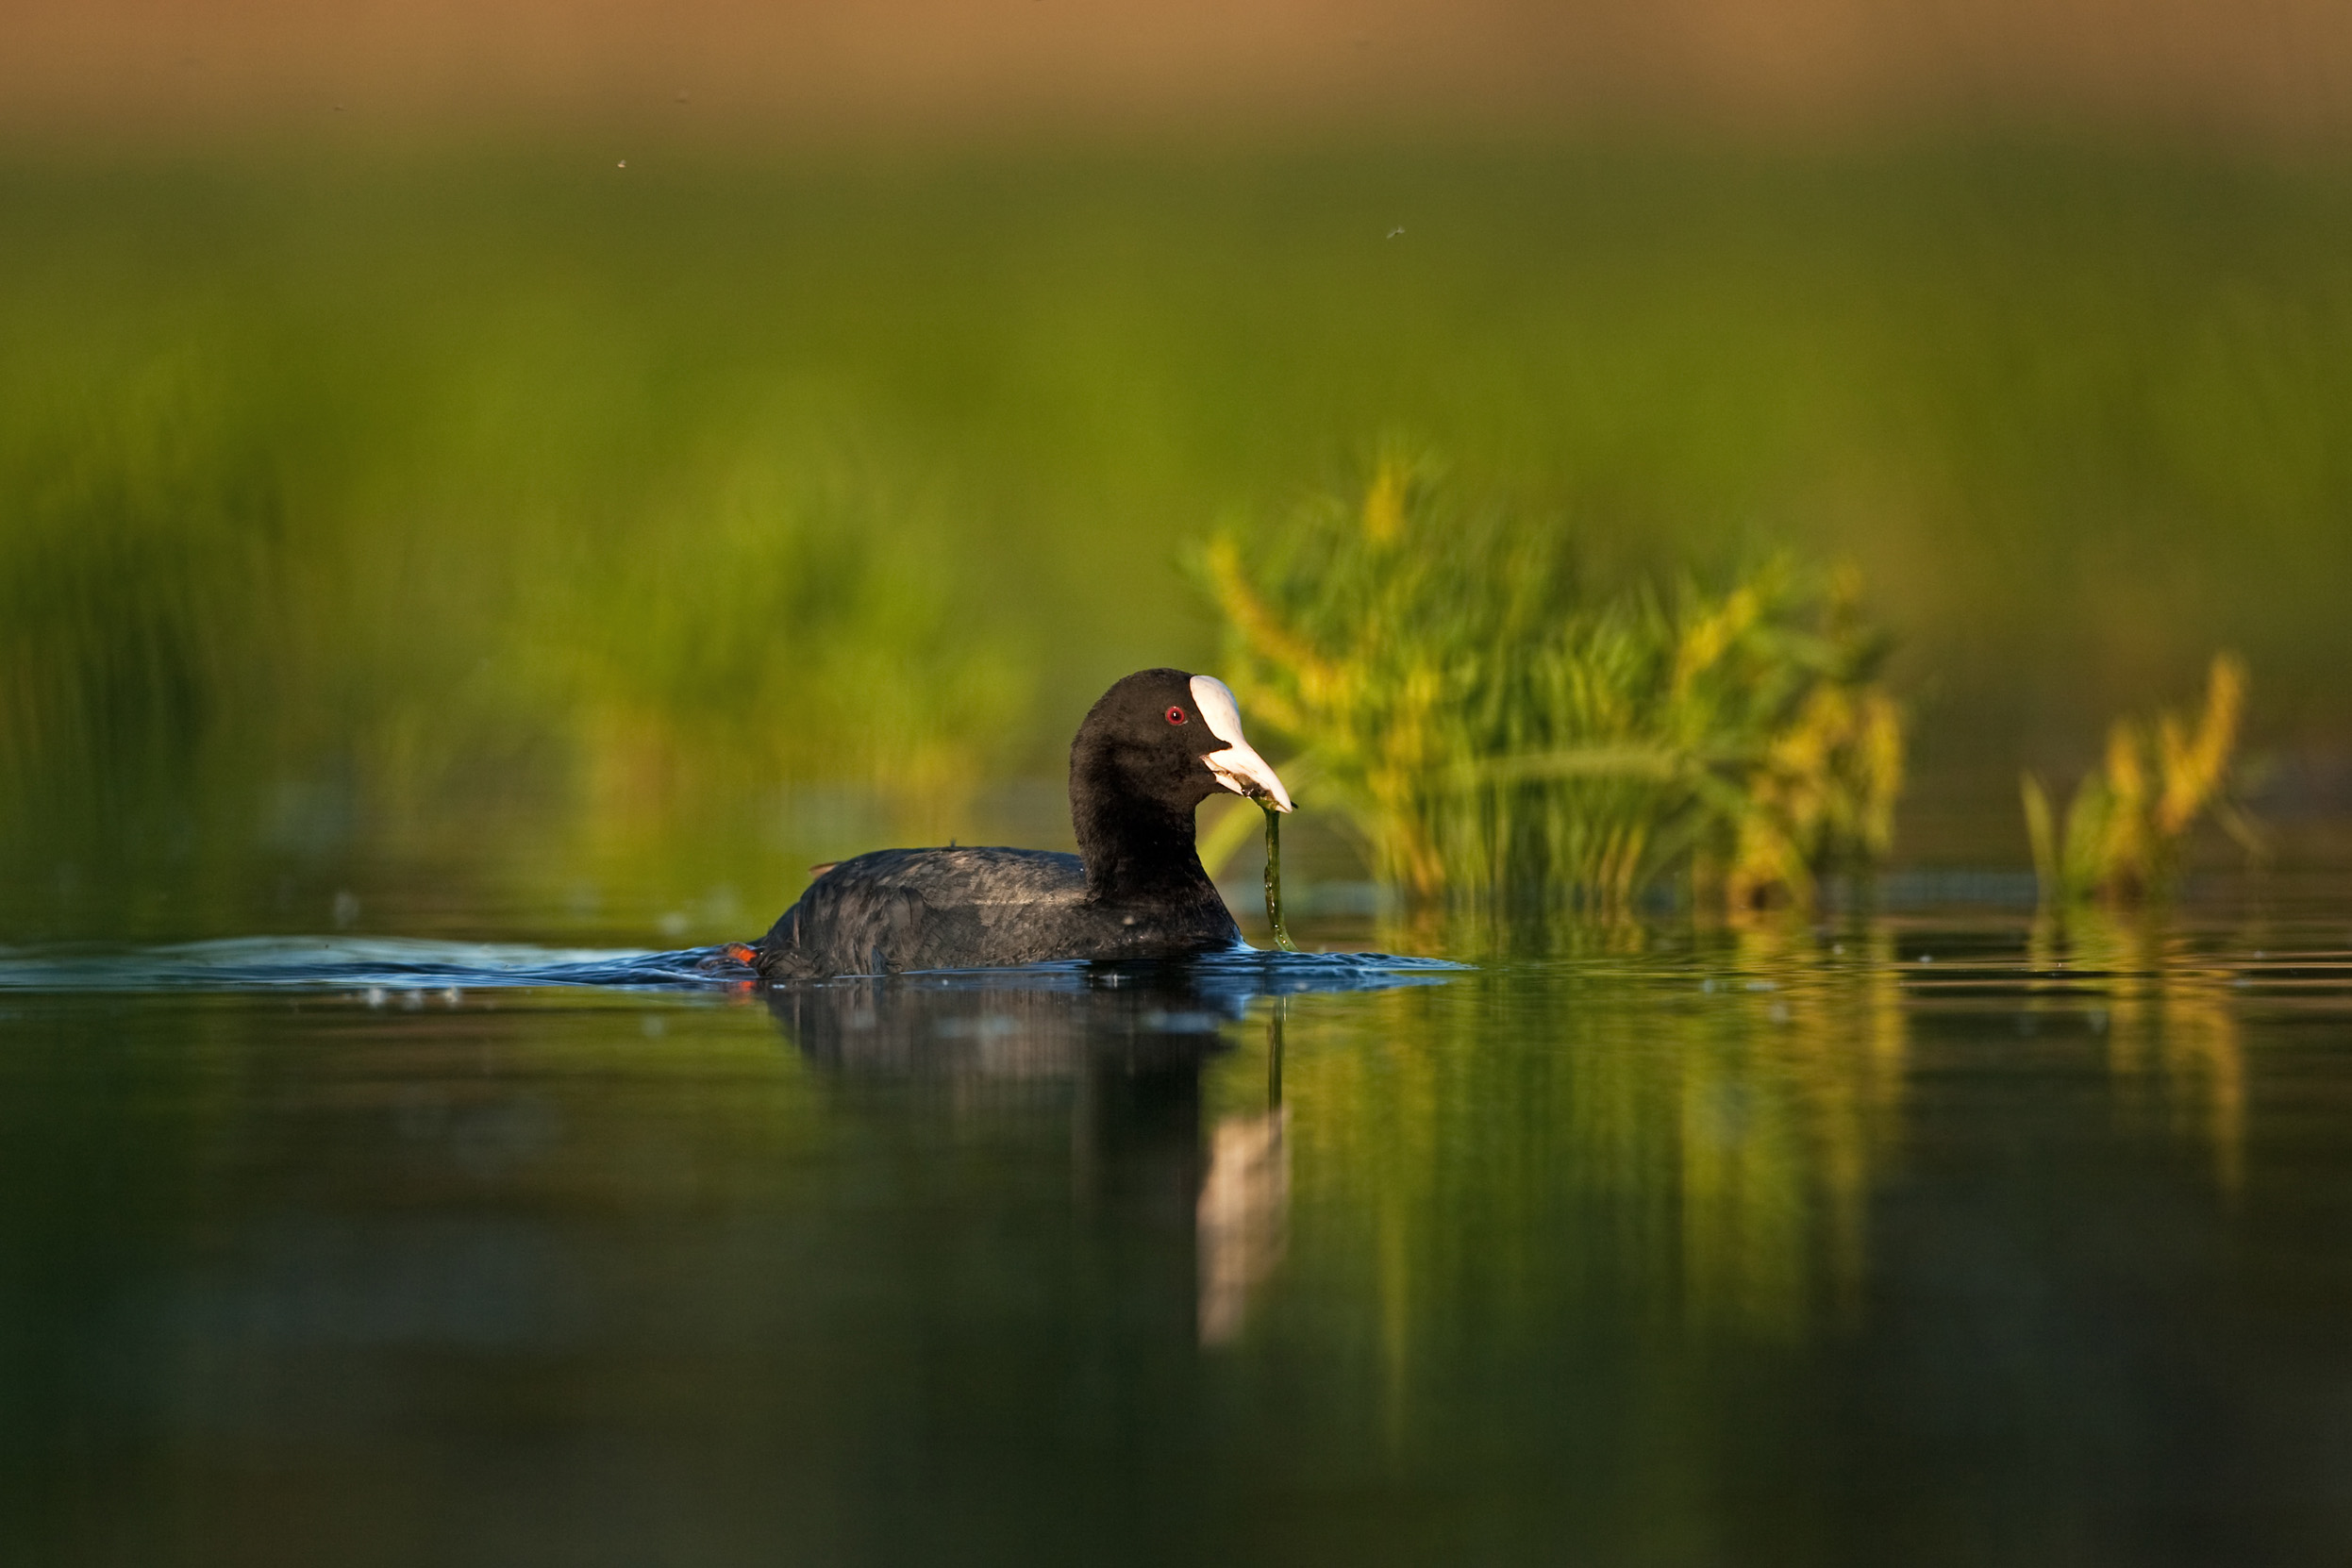 A lone Coot swimming on a body of water surrounded by reeds.